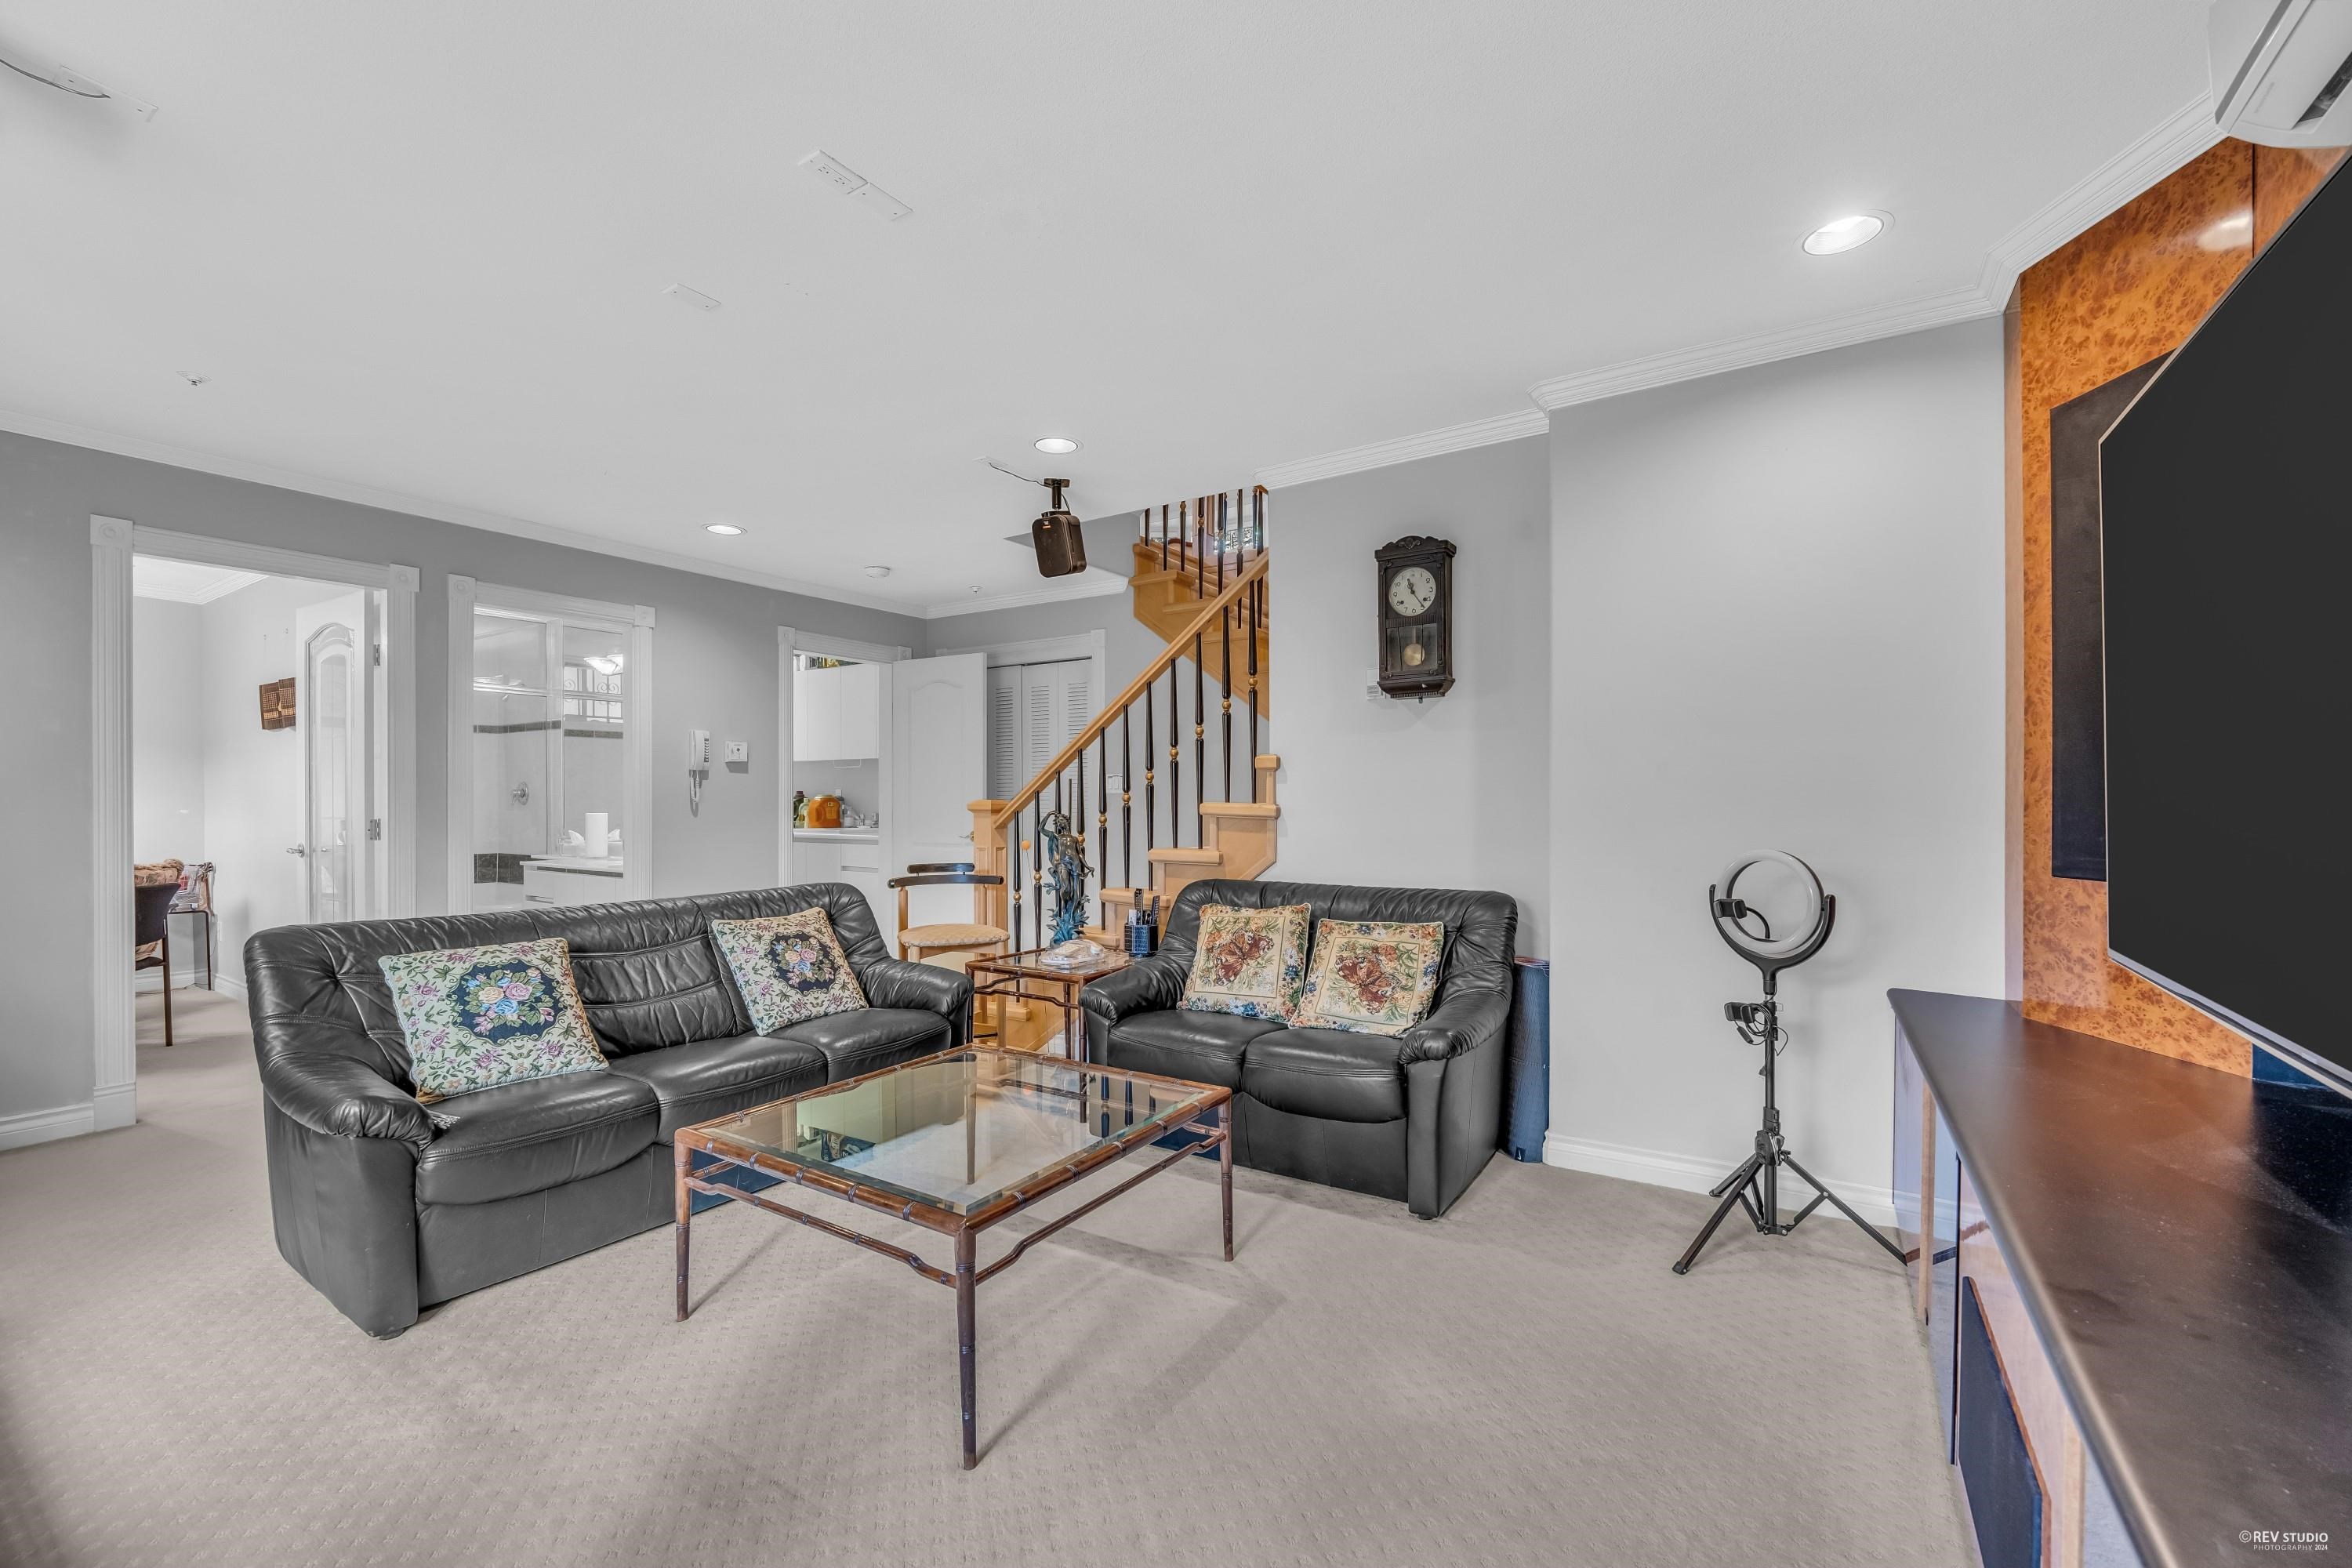 Listing image of 720 W 61ST AVENUE